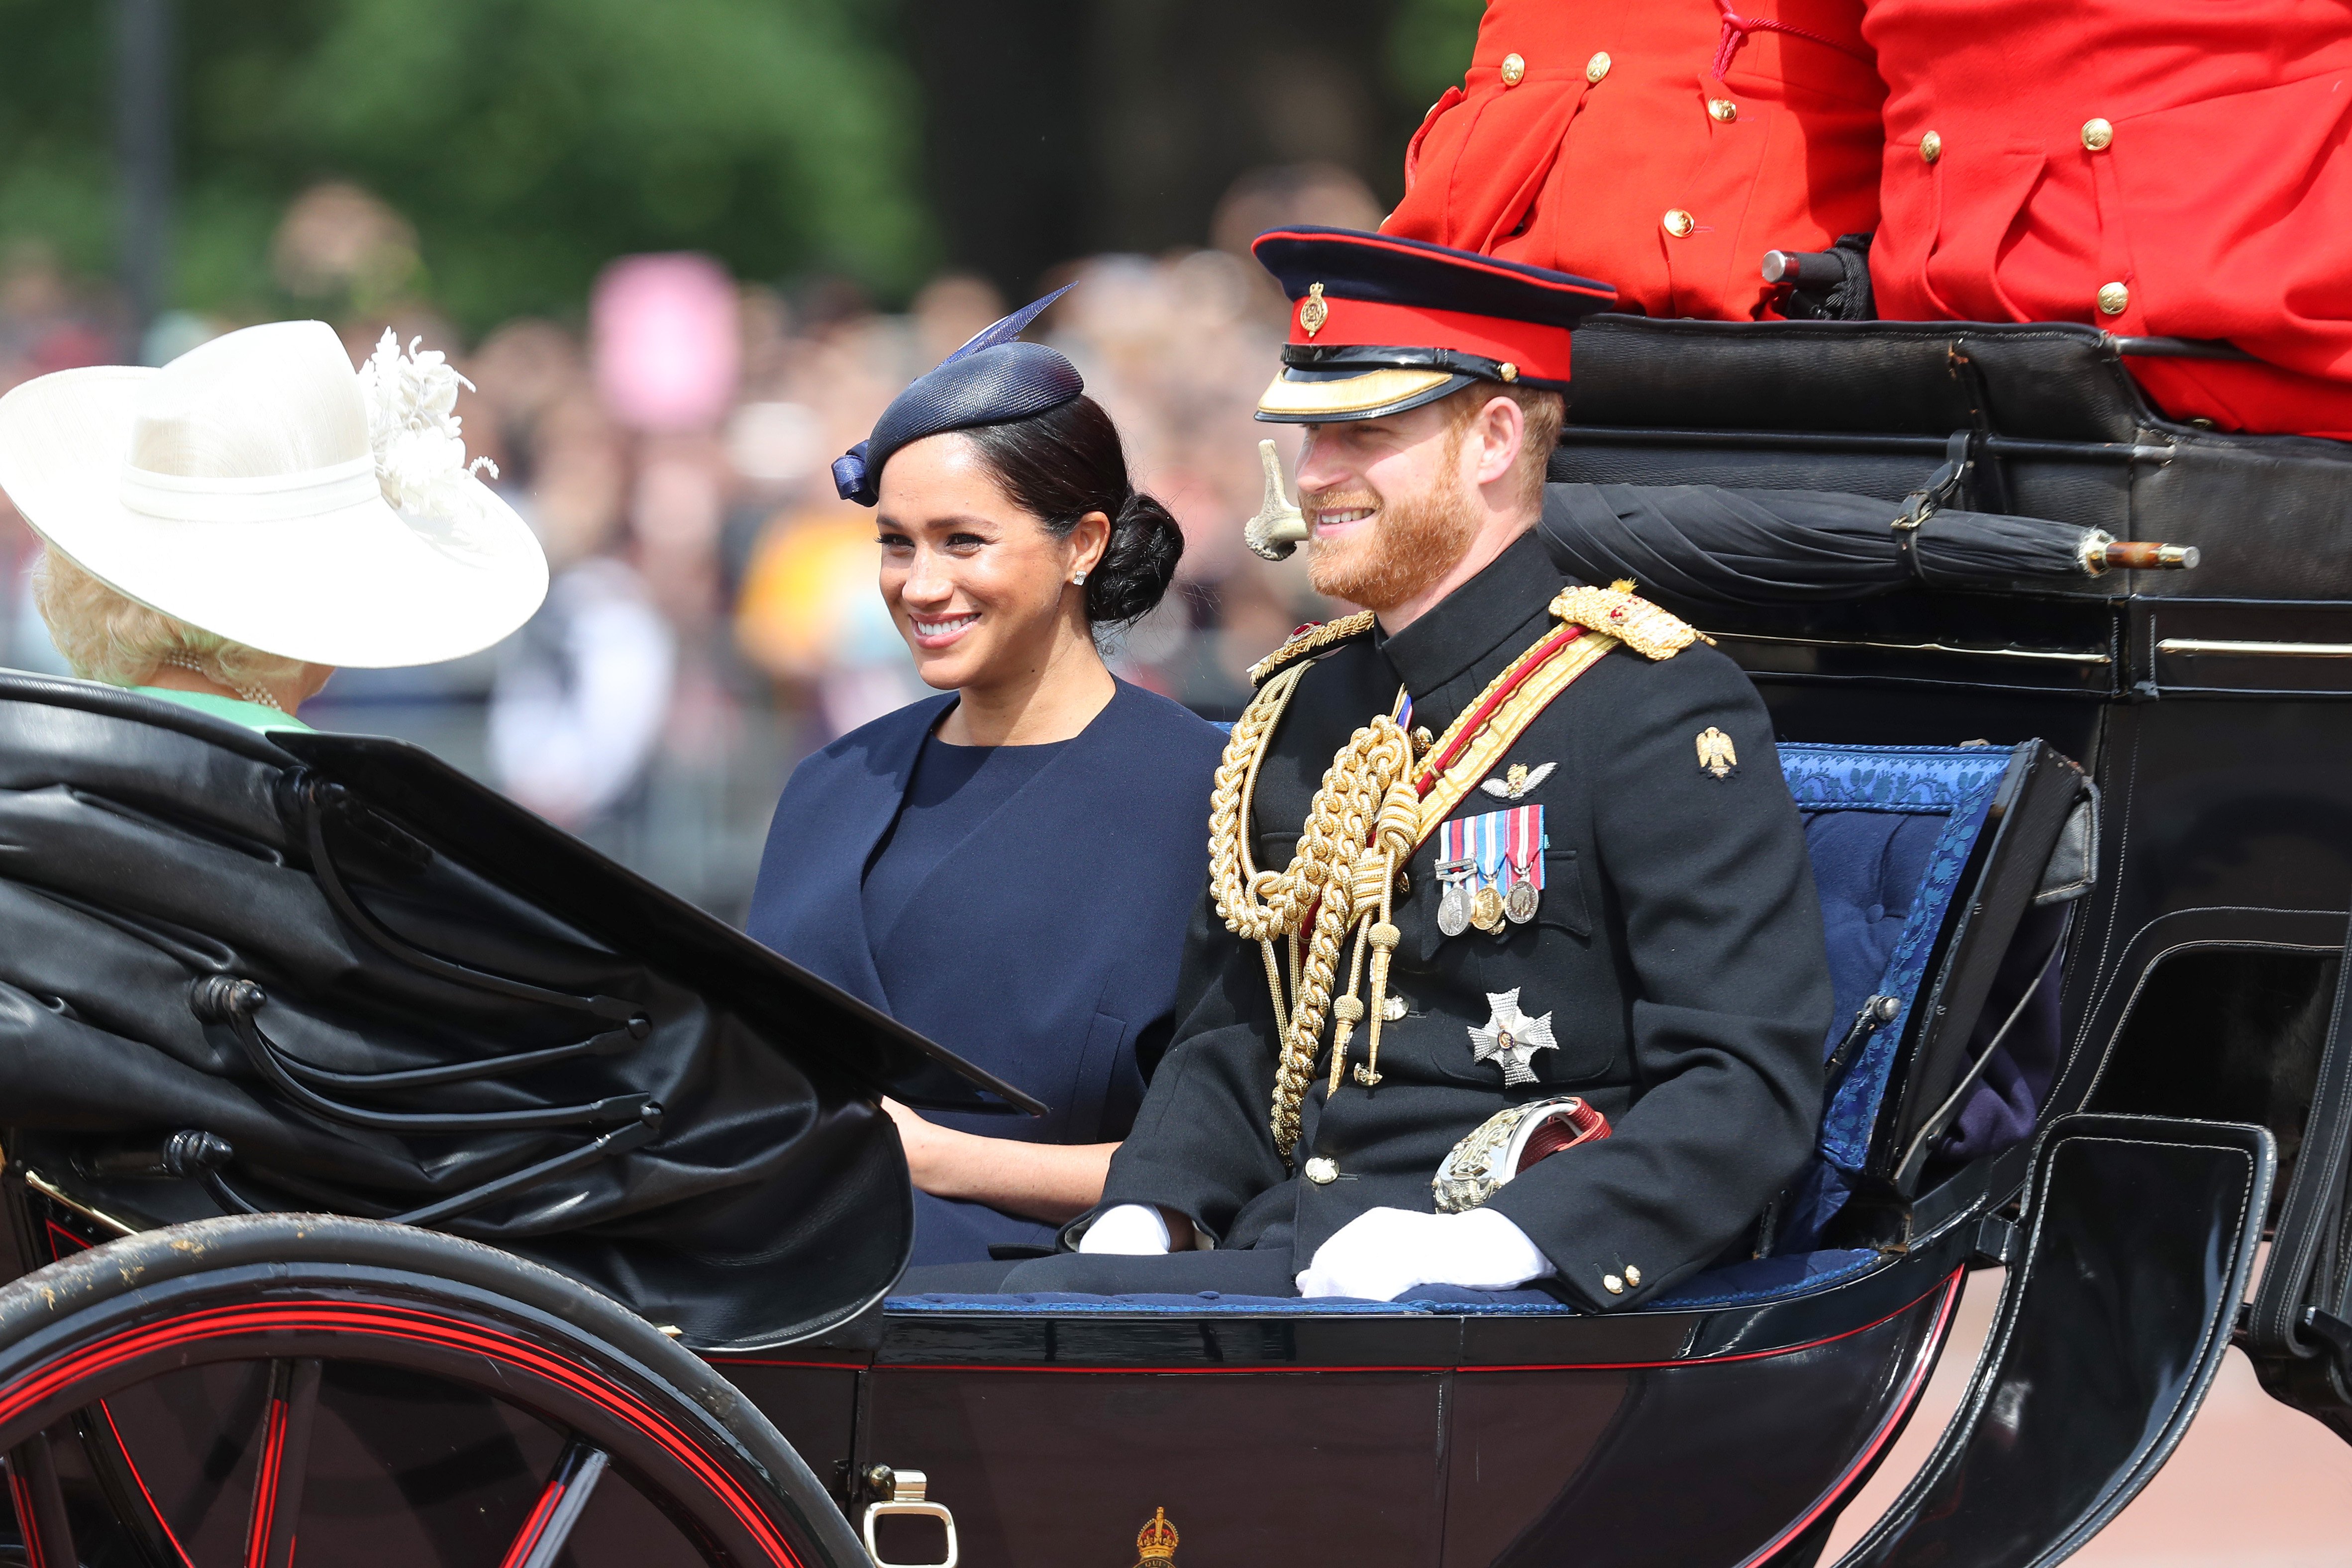 Meghan Markle and Prince Harry at Trooping The Colour, the Queen's annual birthday parade, on June 08, 2019 in London, England | Photo: Getty Images